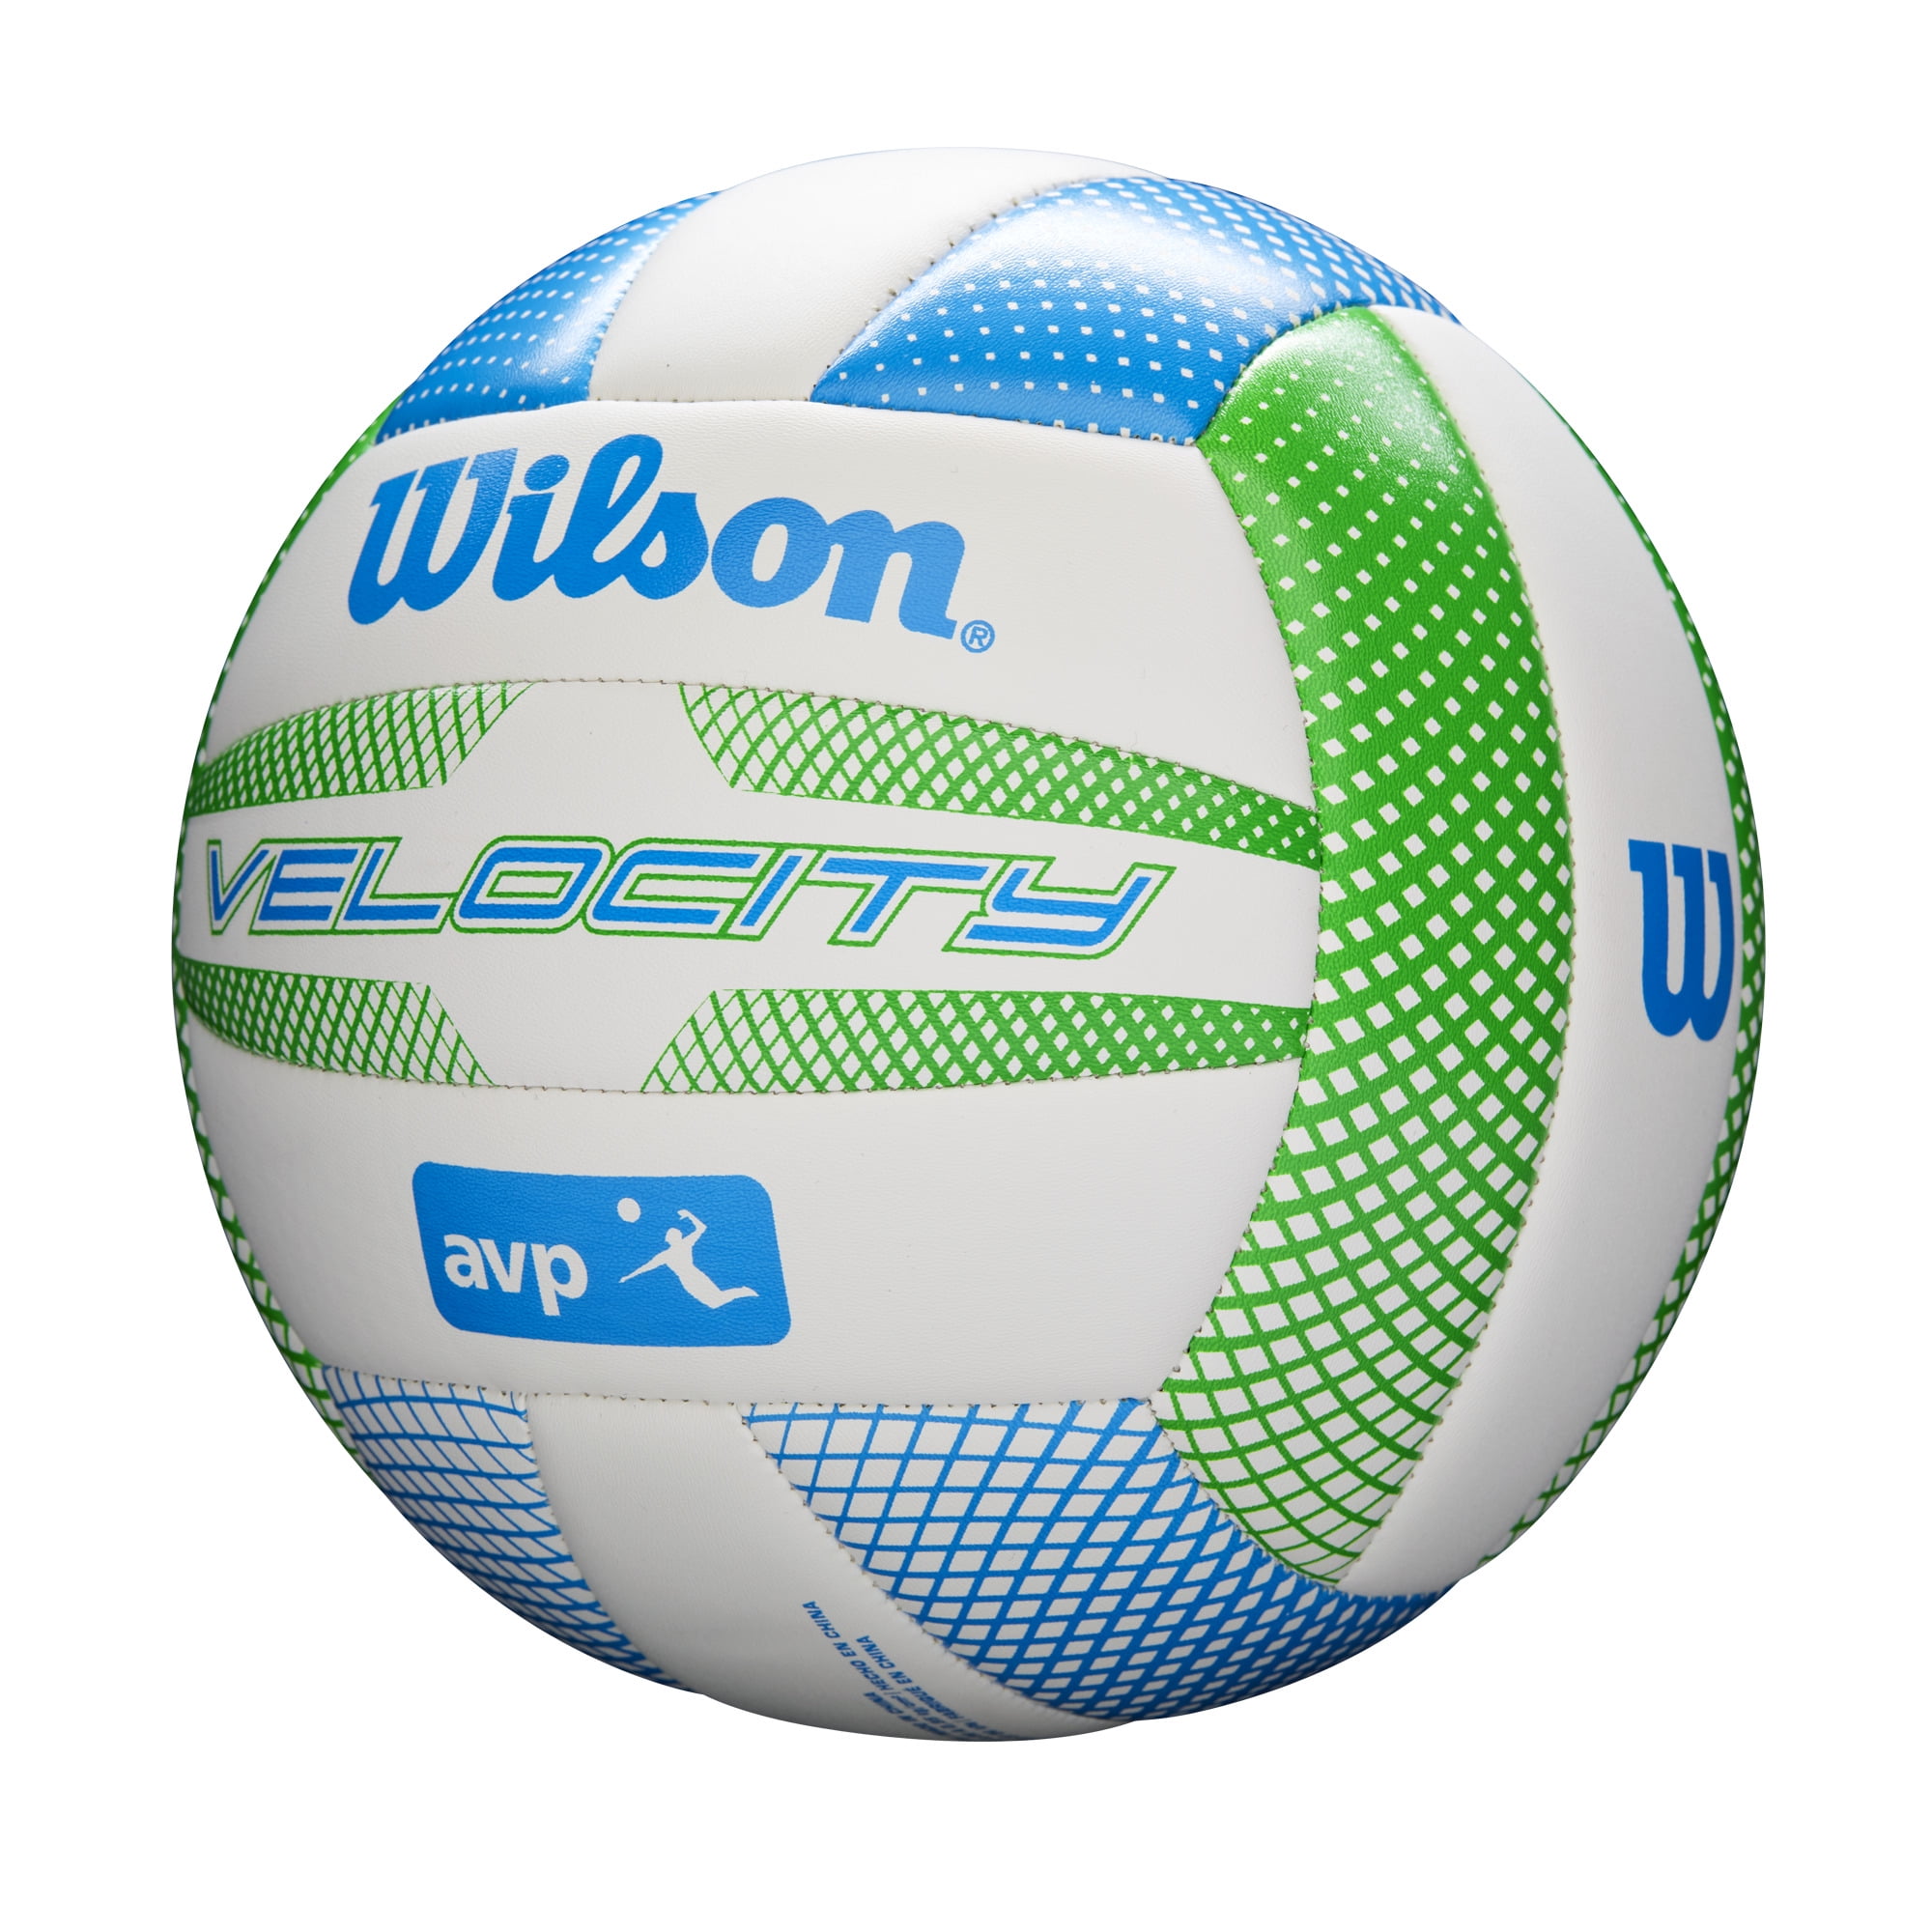 Green Volleyball, Velocity - Official AVP Size Wilson